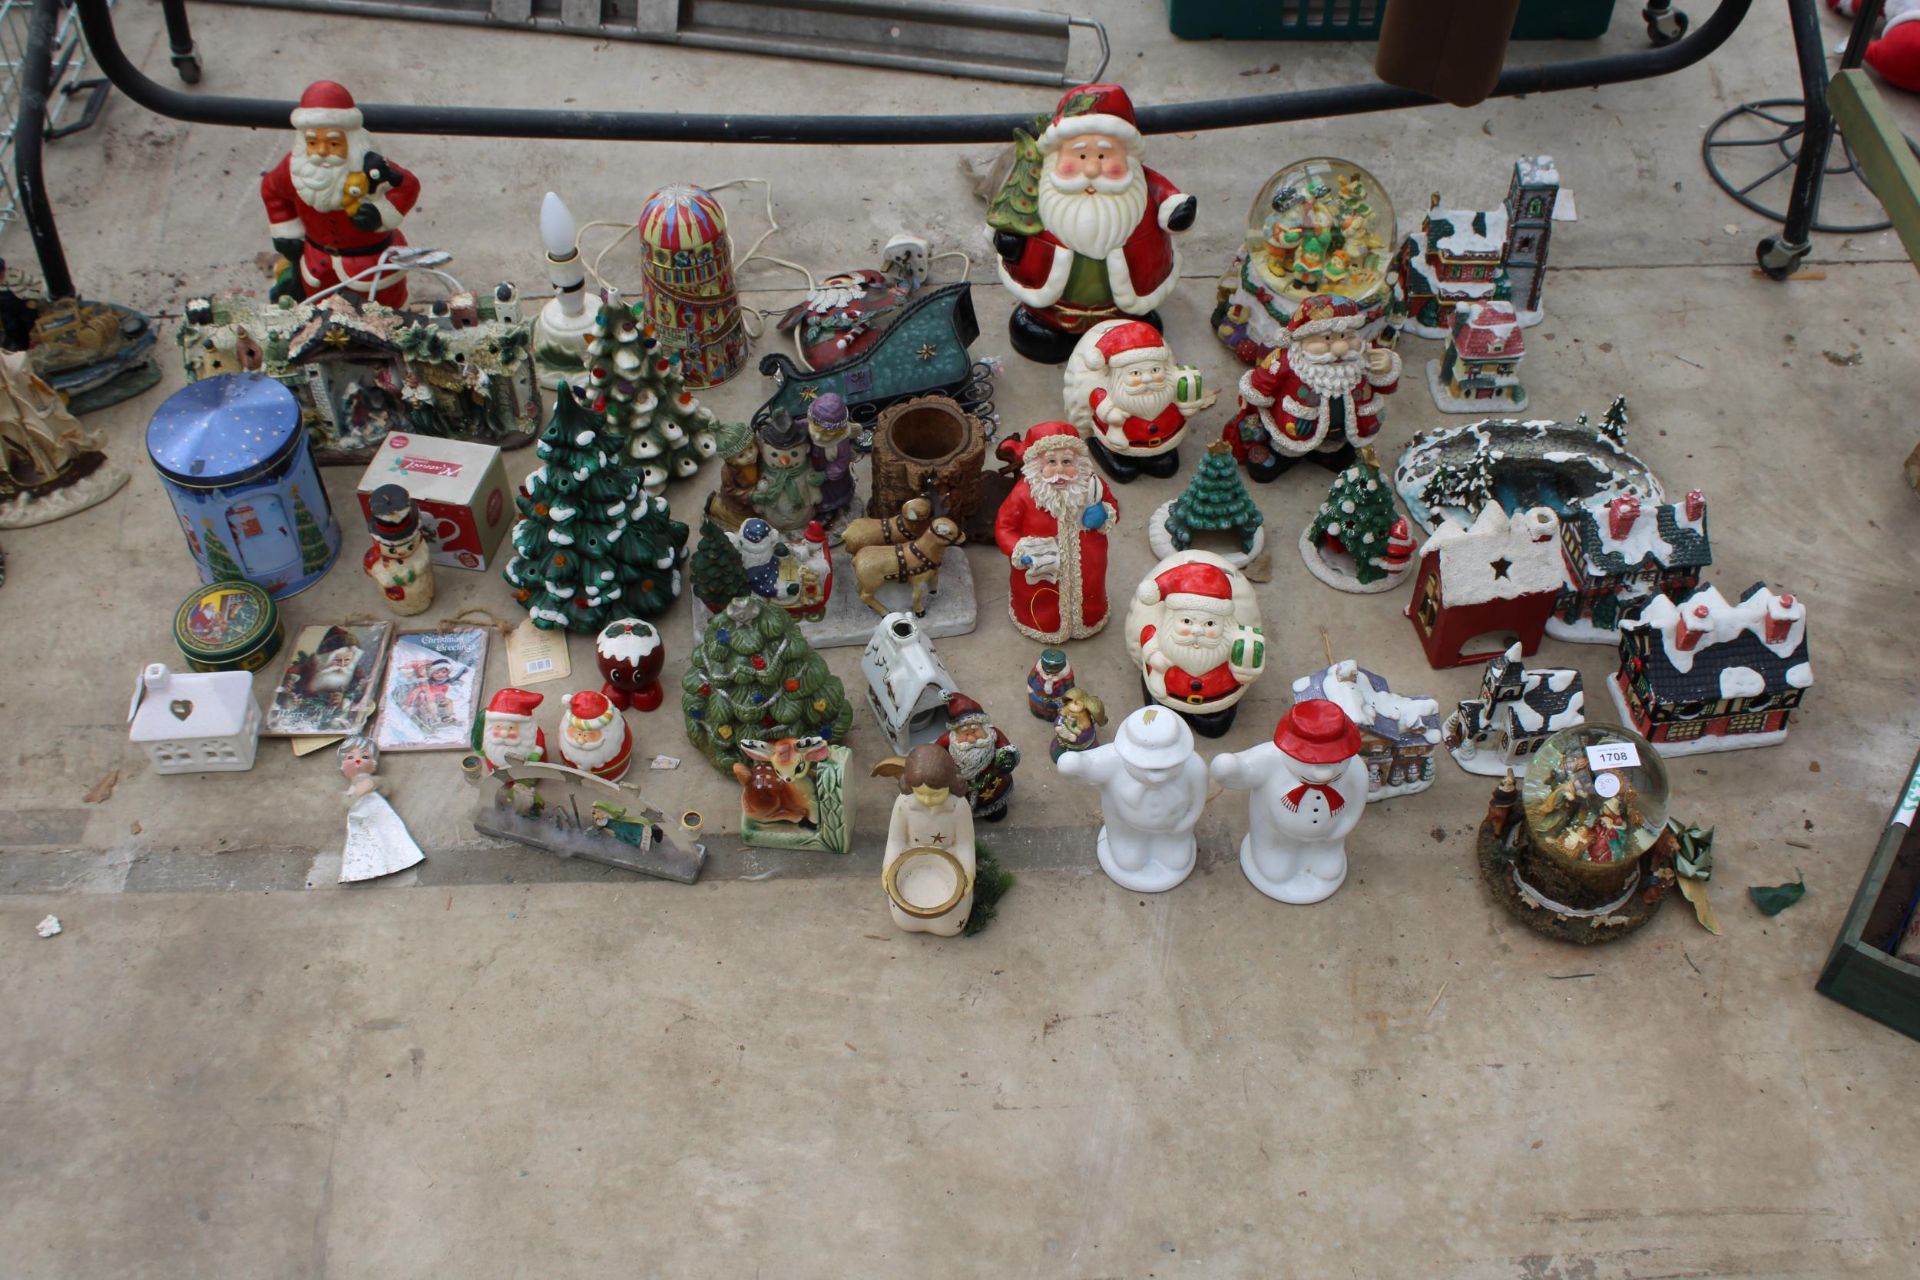 A LARGE ASSORTMENT OF CHRISTMAS DECORATIONS TO INCLUDE A SNOW GLOBE, SANTA FIGURES AND NATIVITY